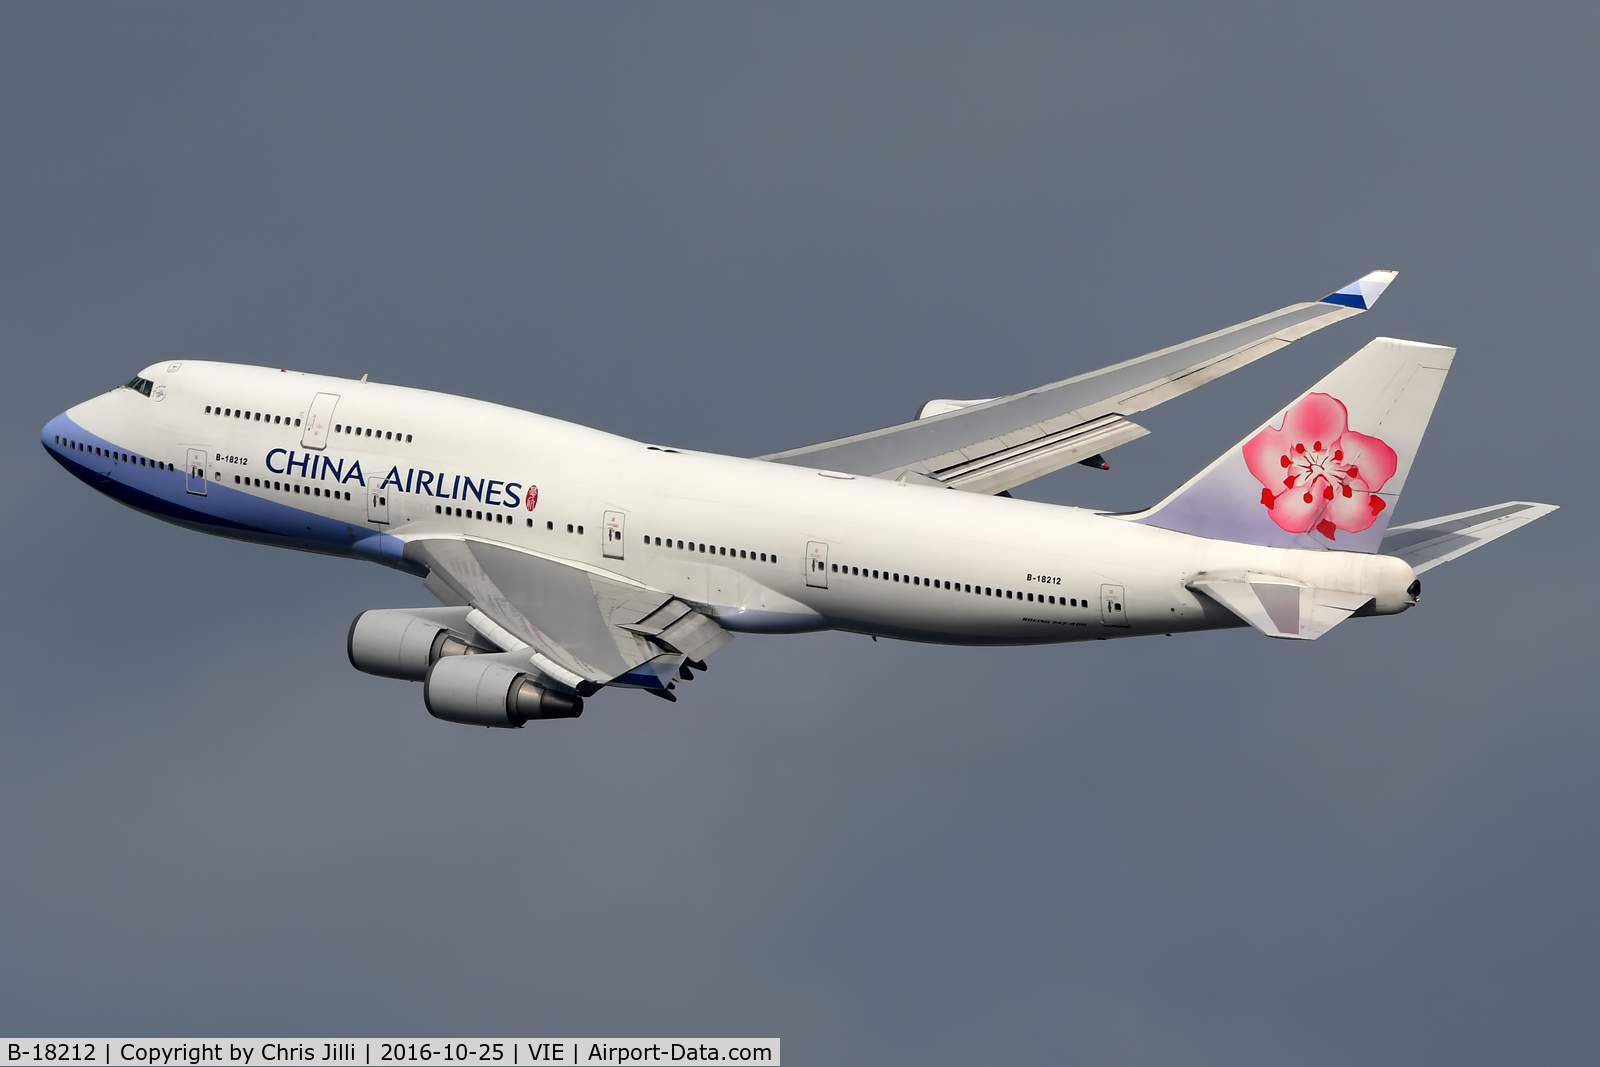 B-18212, 2005 Boeing 747-409 C/N 33736, China Airlines